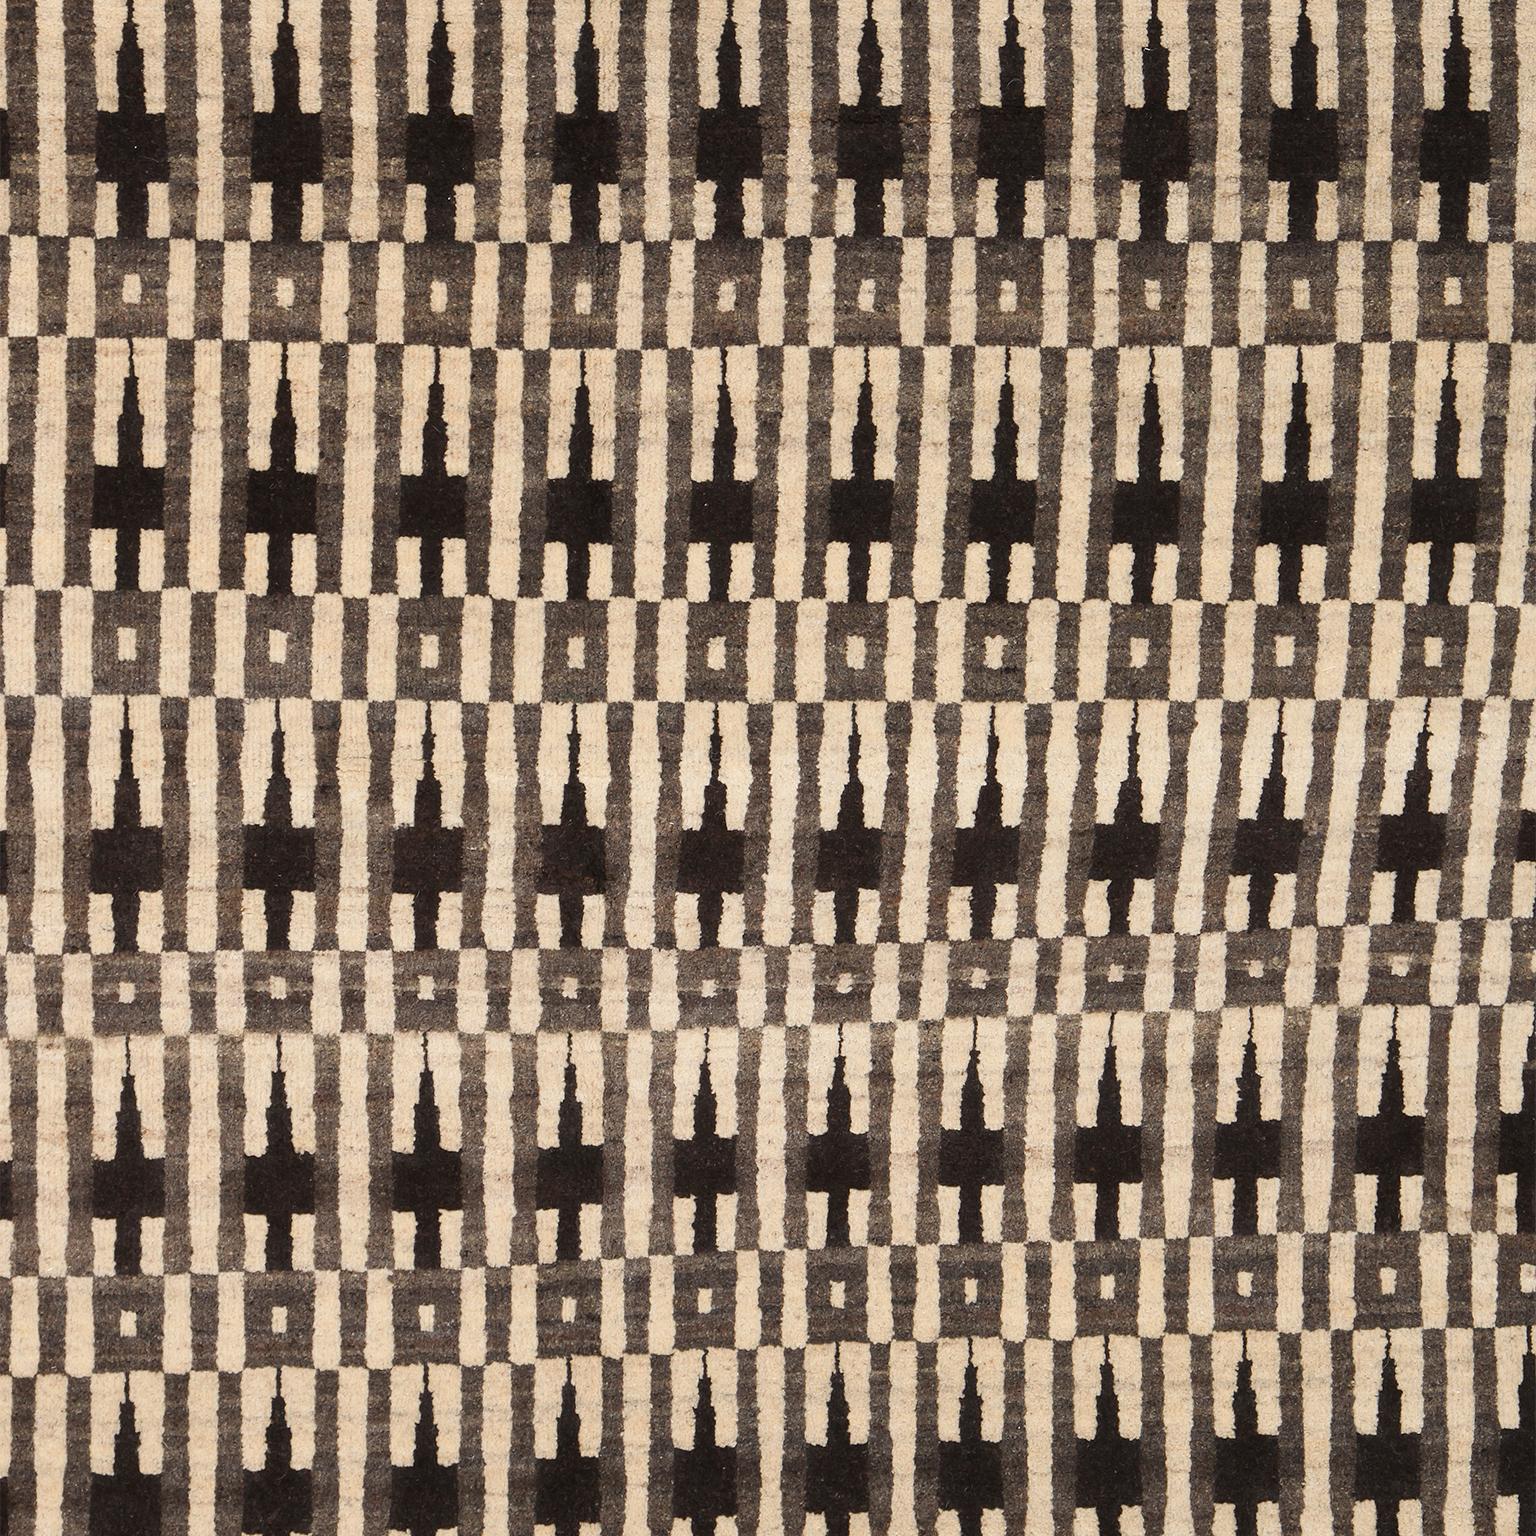 Hand-Knotted Cream, Grey, and Brown Modern Architectural Geometric Wool Carpet